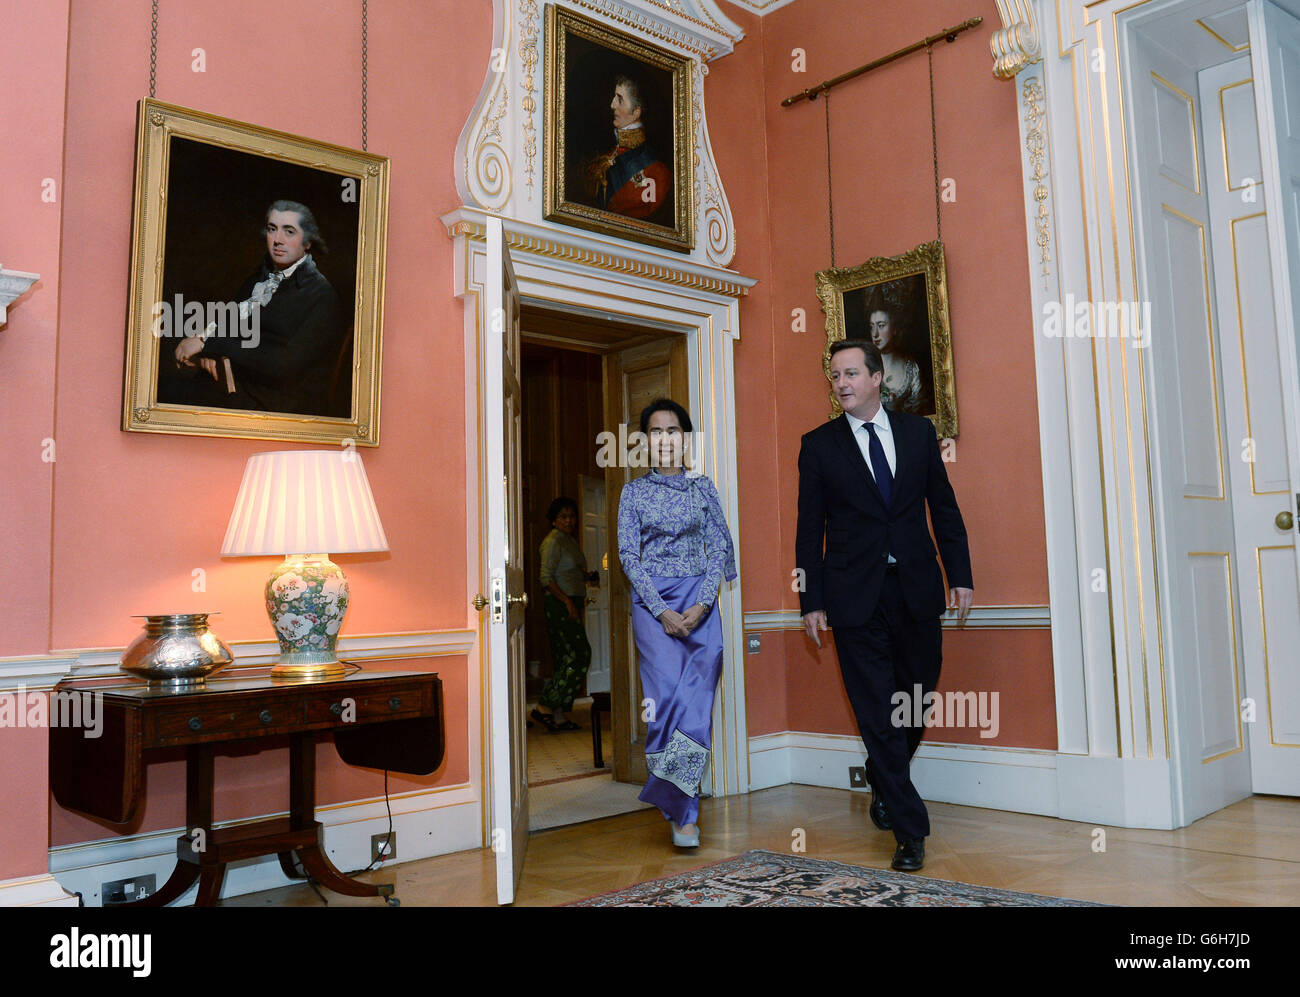 Prime Minister David Cameron with Burmese opposition leader Aung San Suu Kyi at a meeting at 10 Downing Street in London. Stock Photo